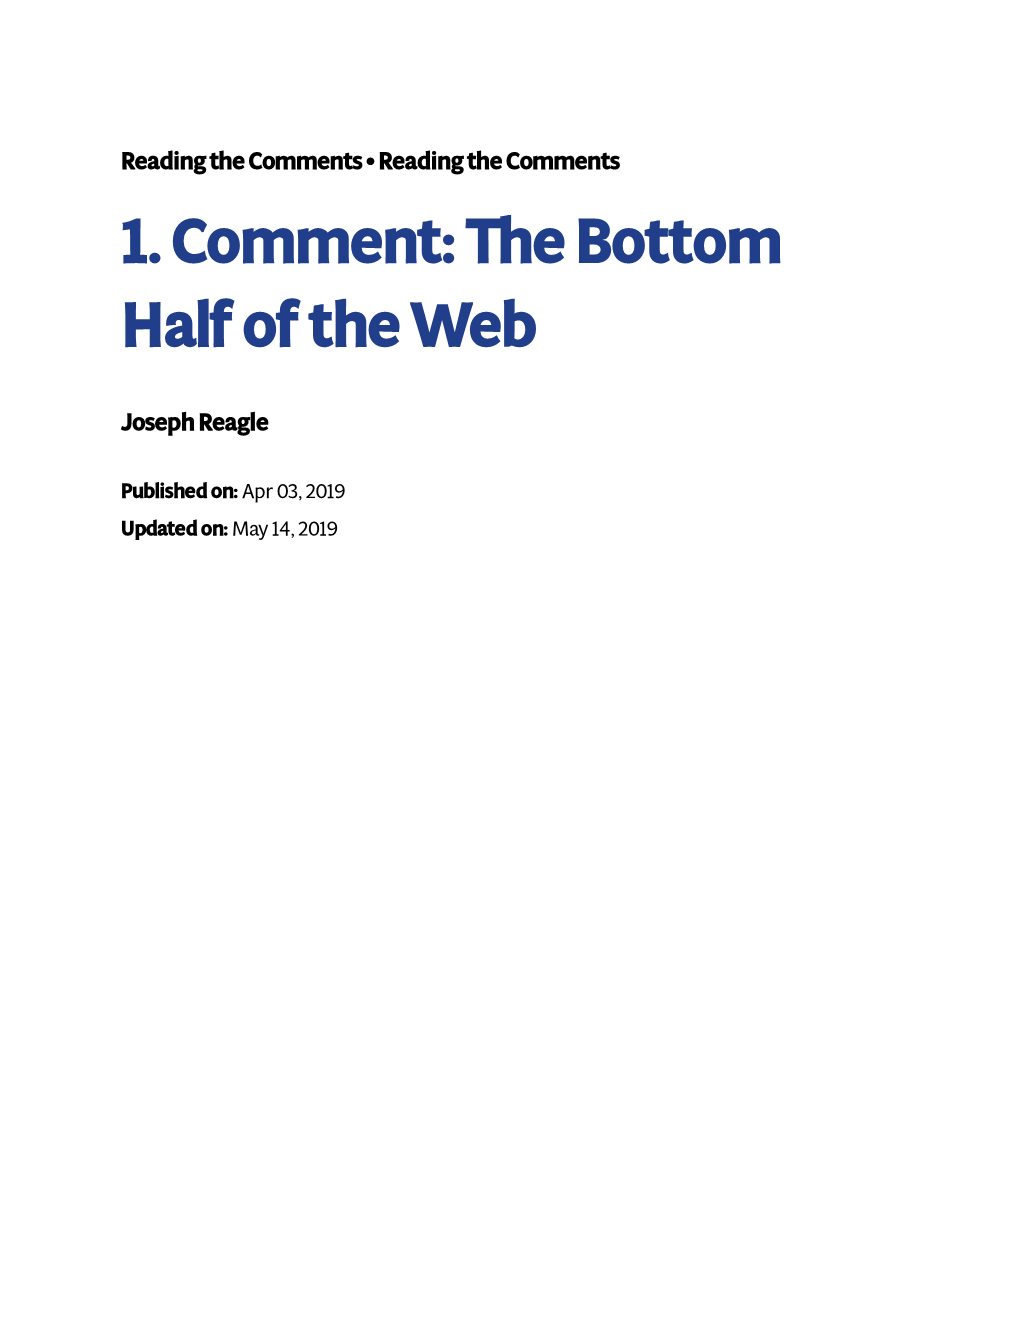 1. Comment: the Bottom Half of the Web